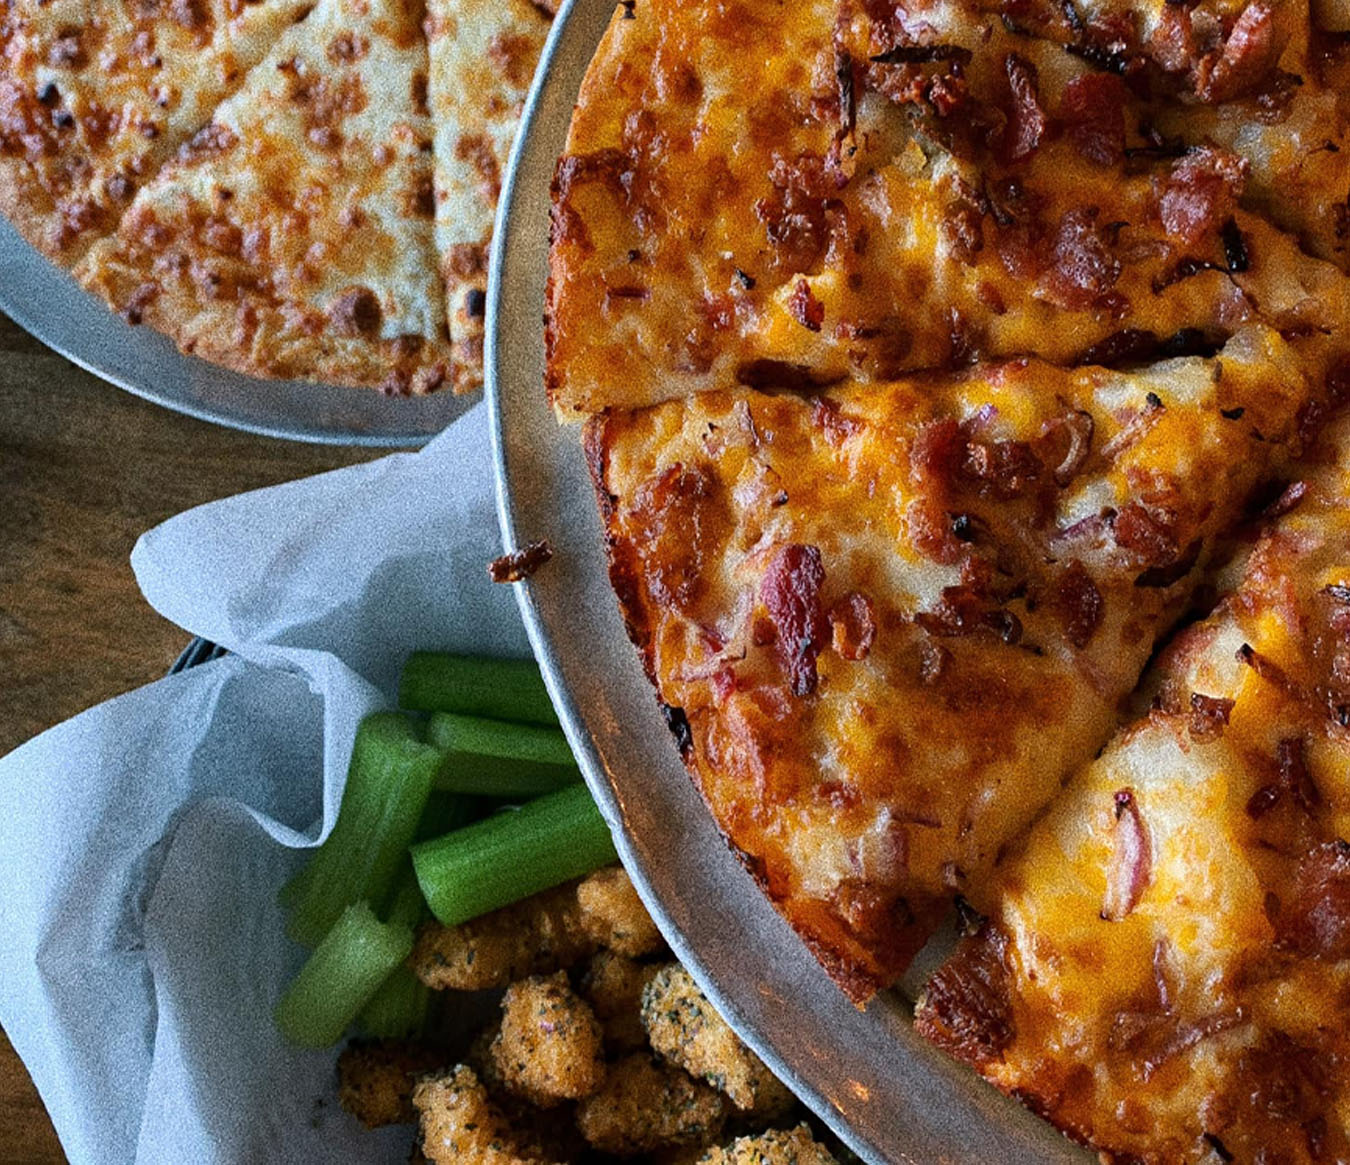 Where To Eat In Cleveland - Angelo's Pizza